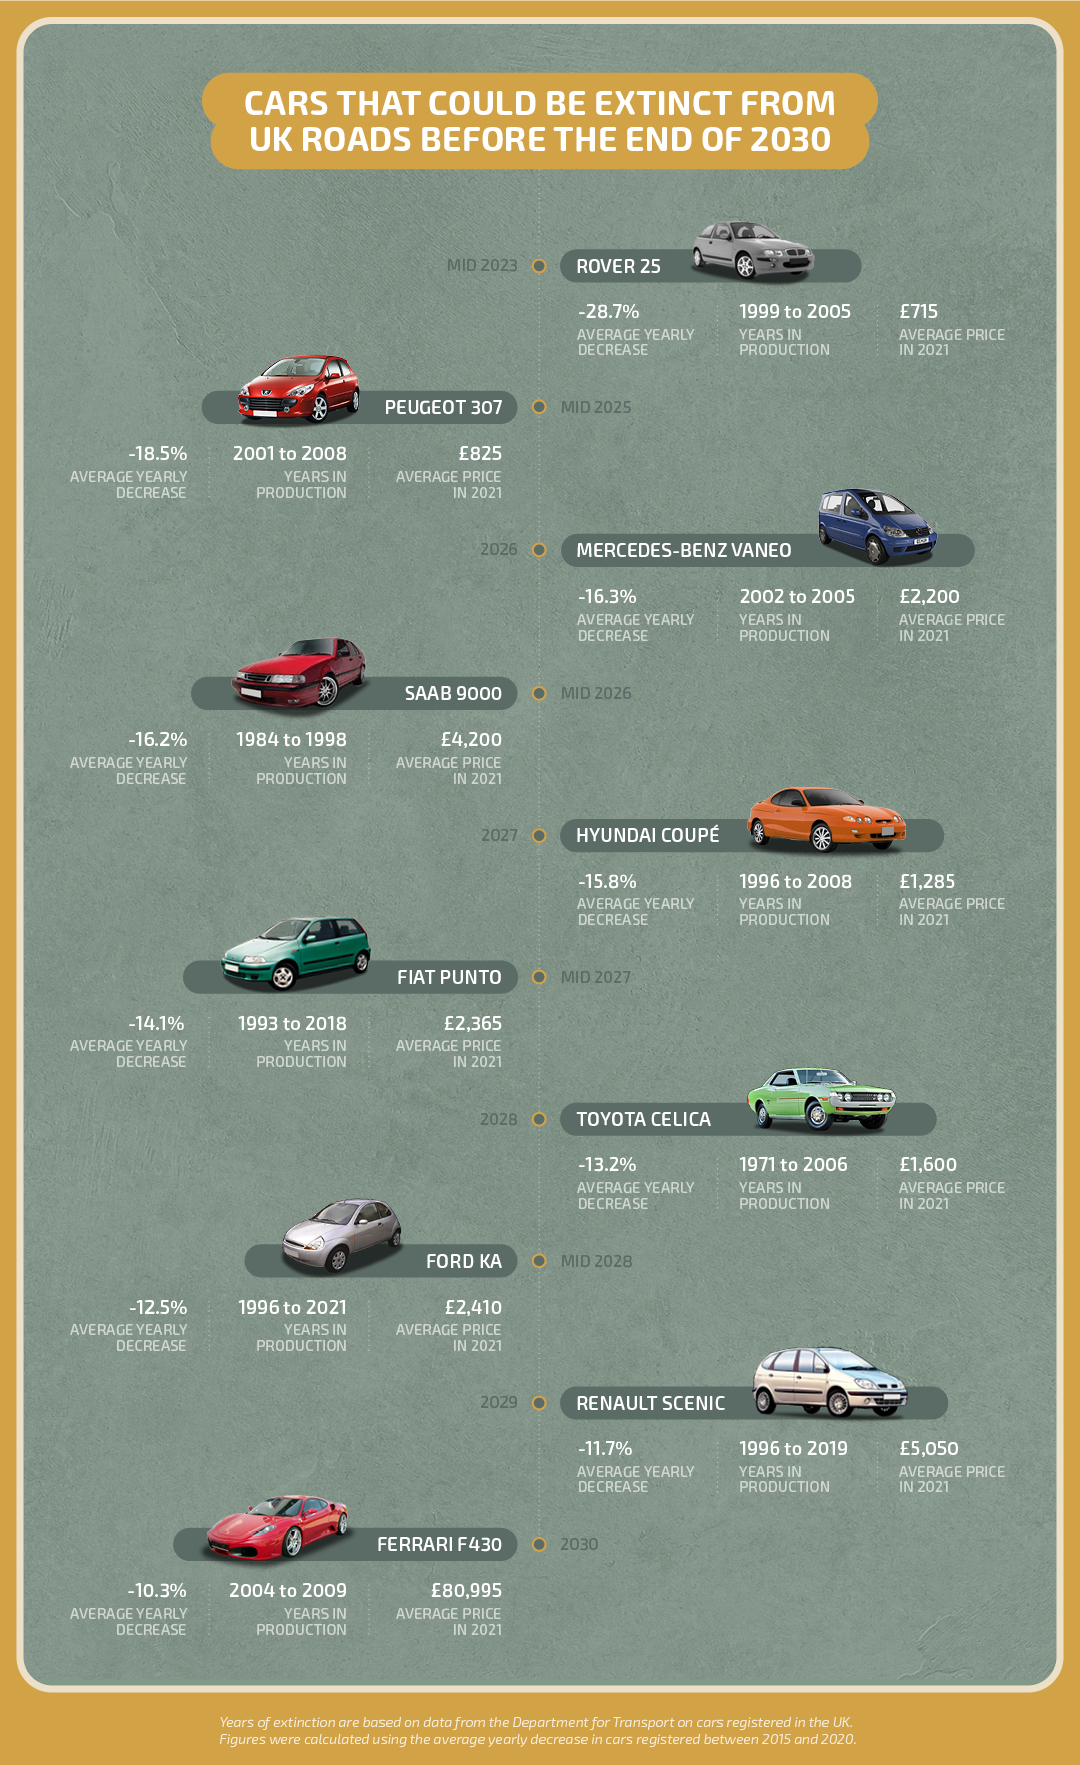 Timeline of extinct cars in the UK